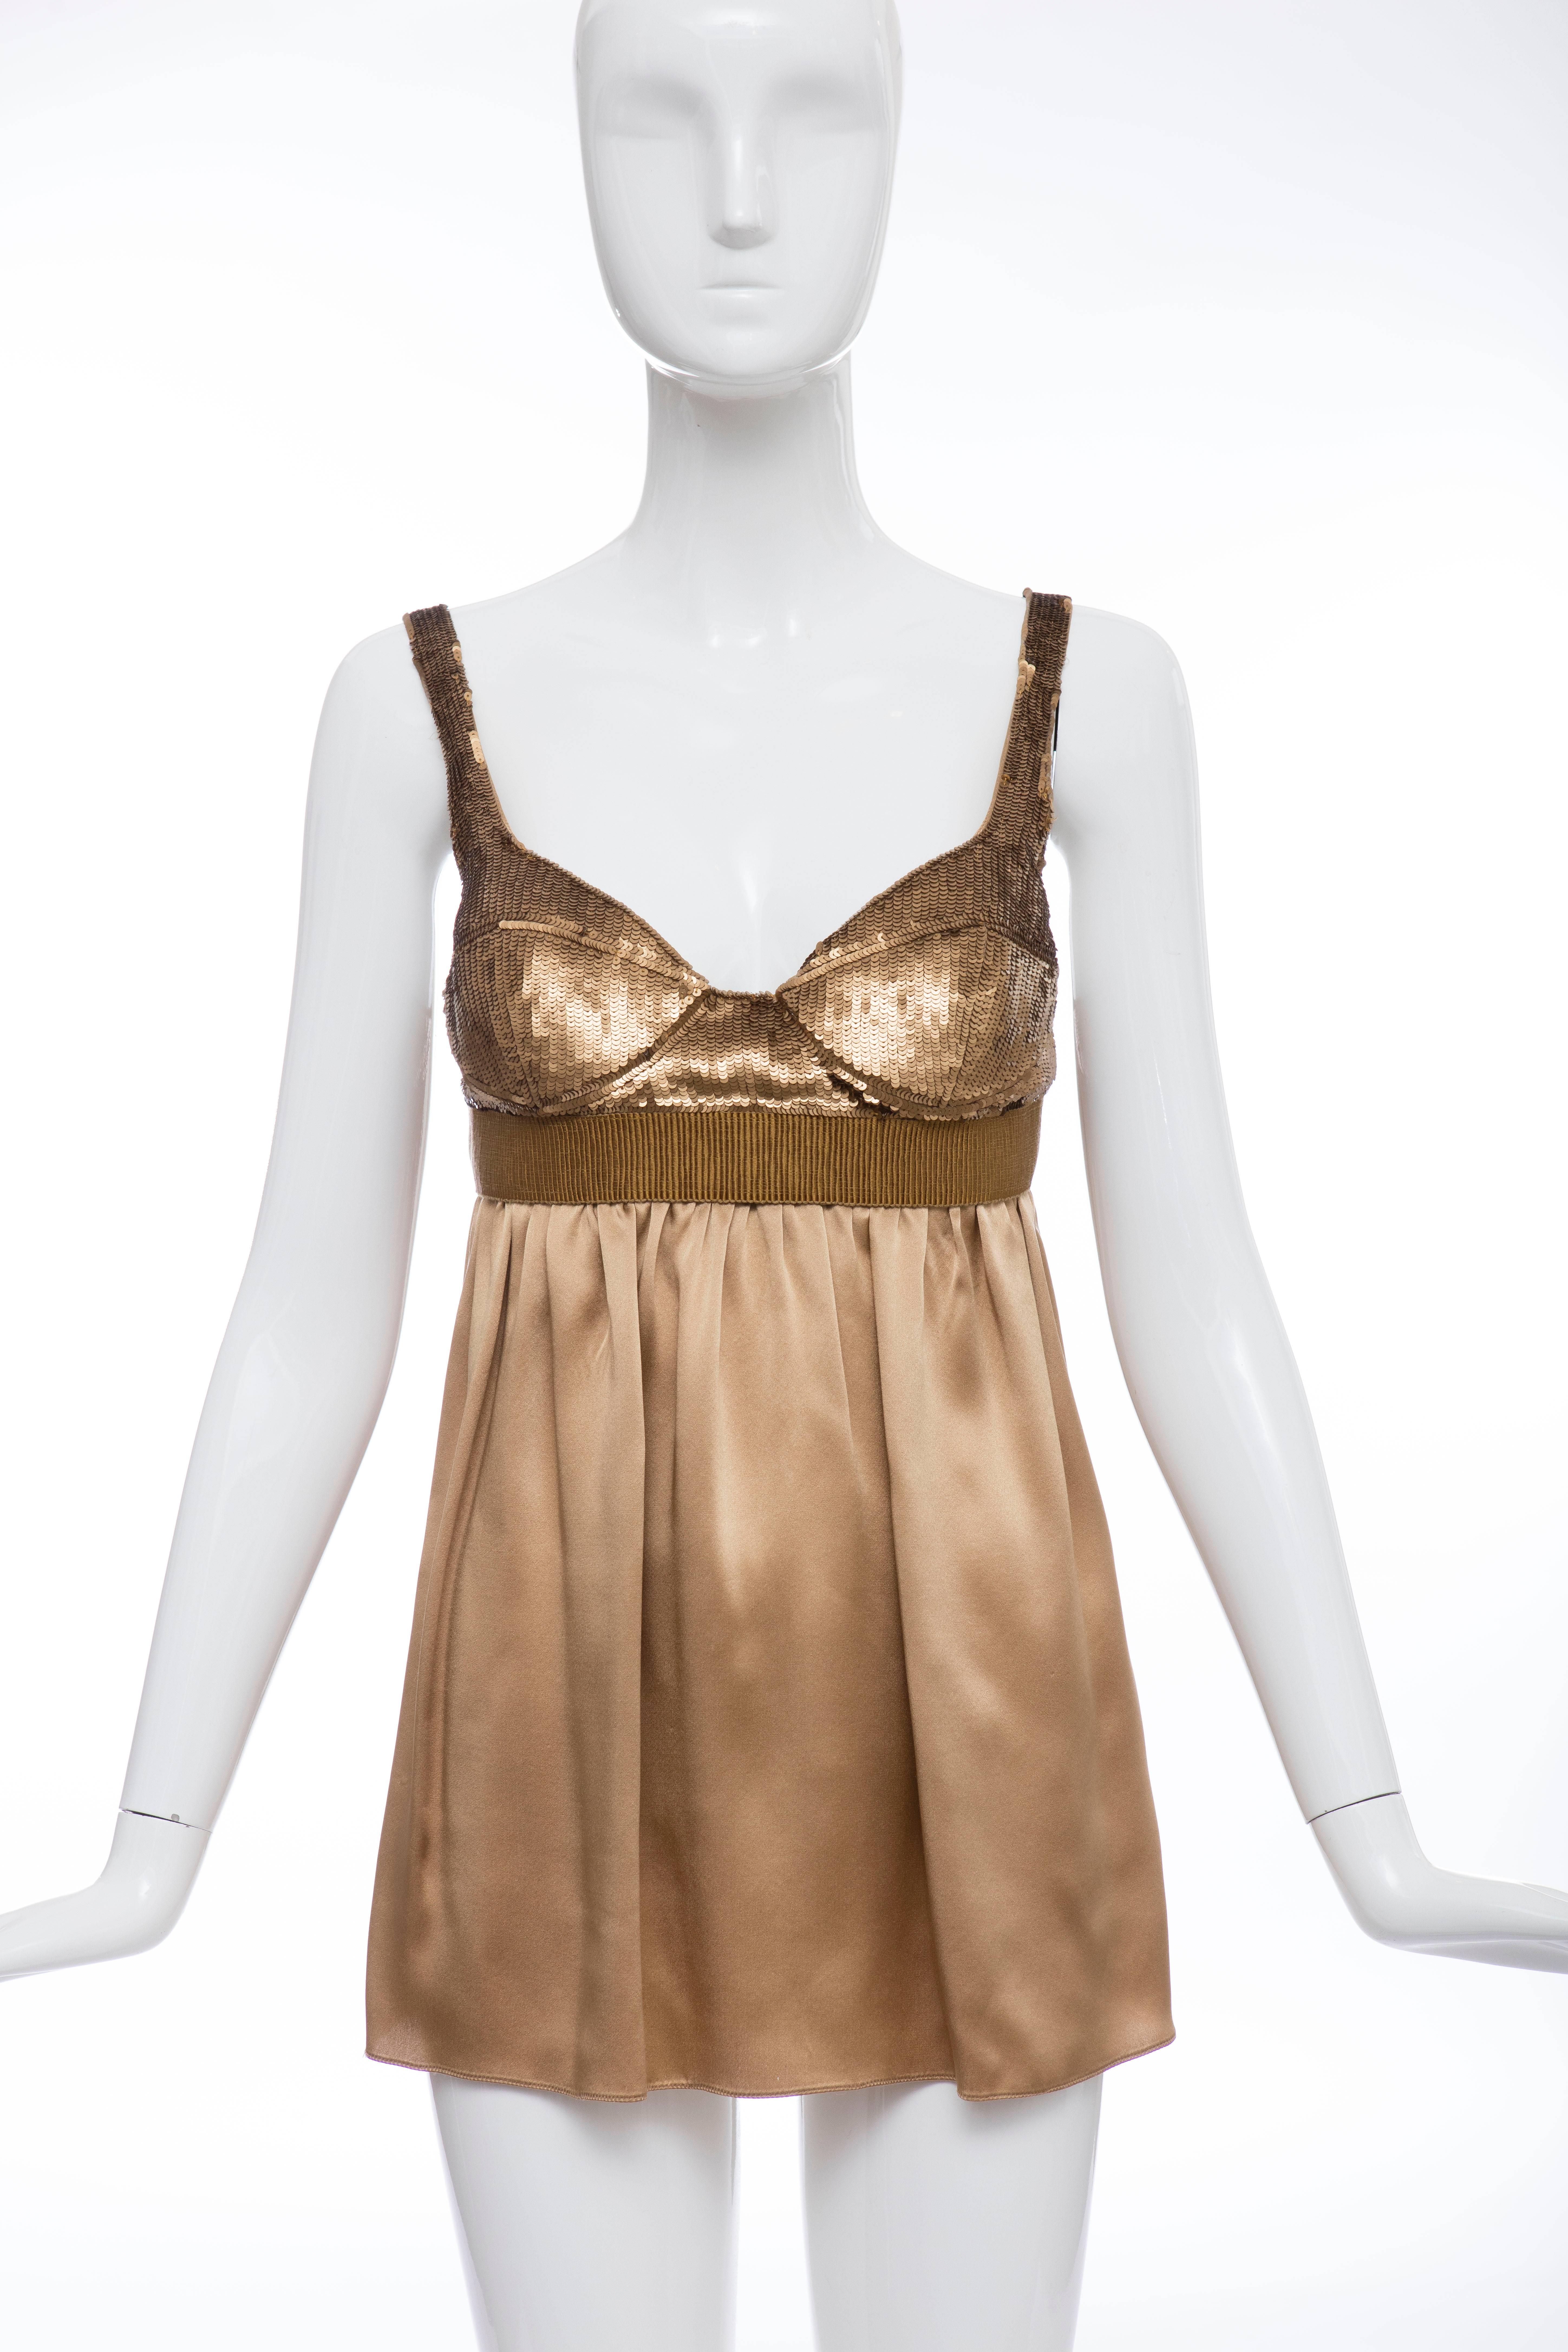 Proenza Schouler,  Spring-Summer 2005 embroidered bronze sequin and silk satin bustier with back hook and eye with snaps back closure.

US. 6
Bust 30, Waist 26, Length 27